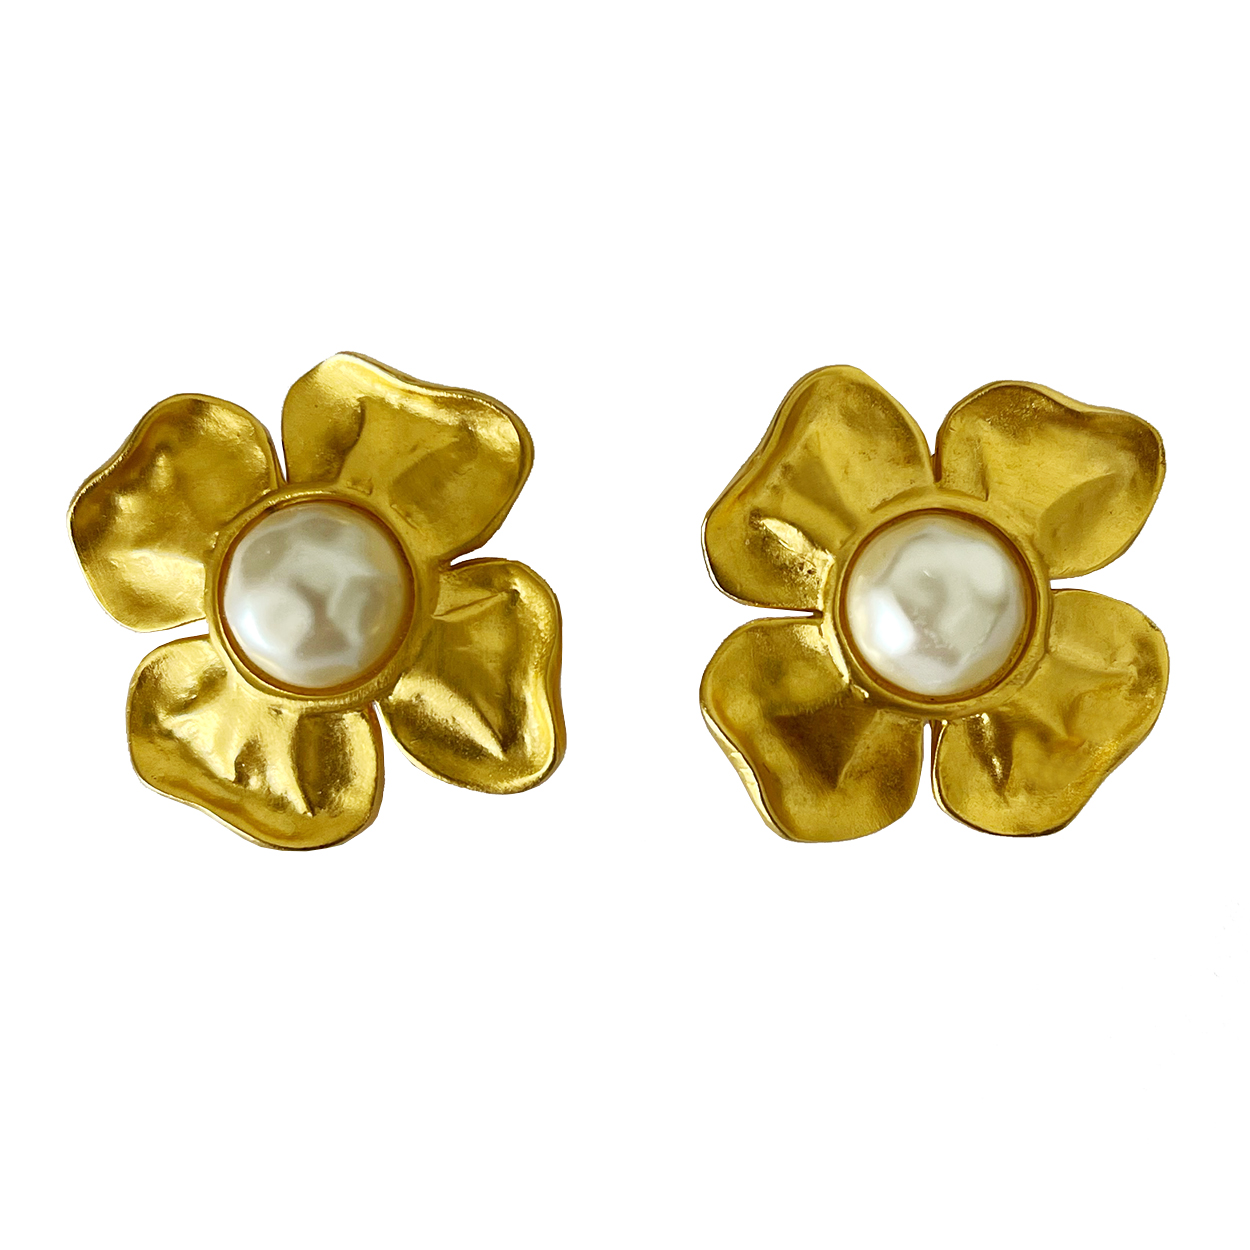 Vintage gold flower earrings with pearl